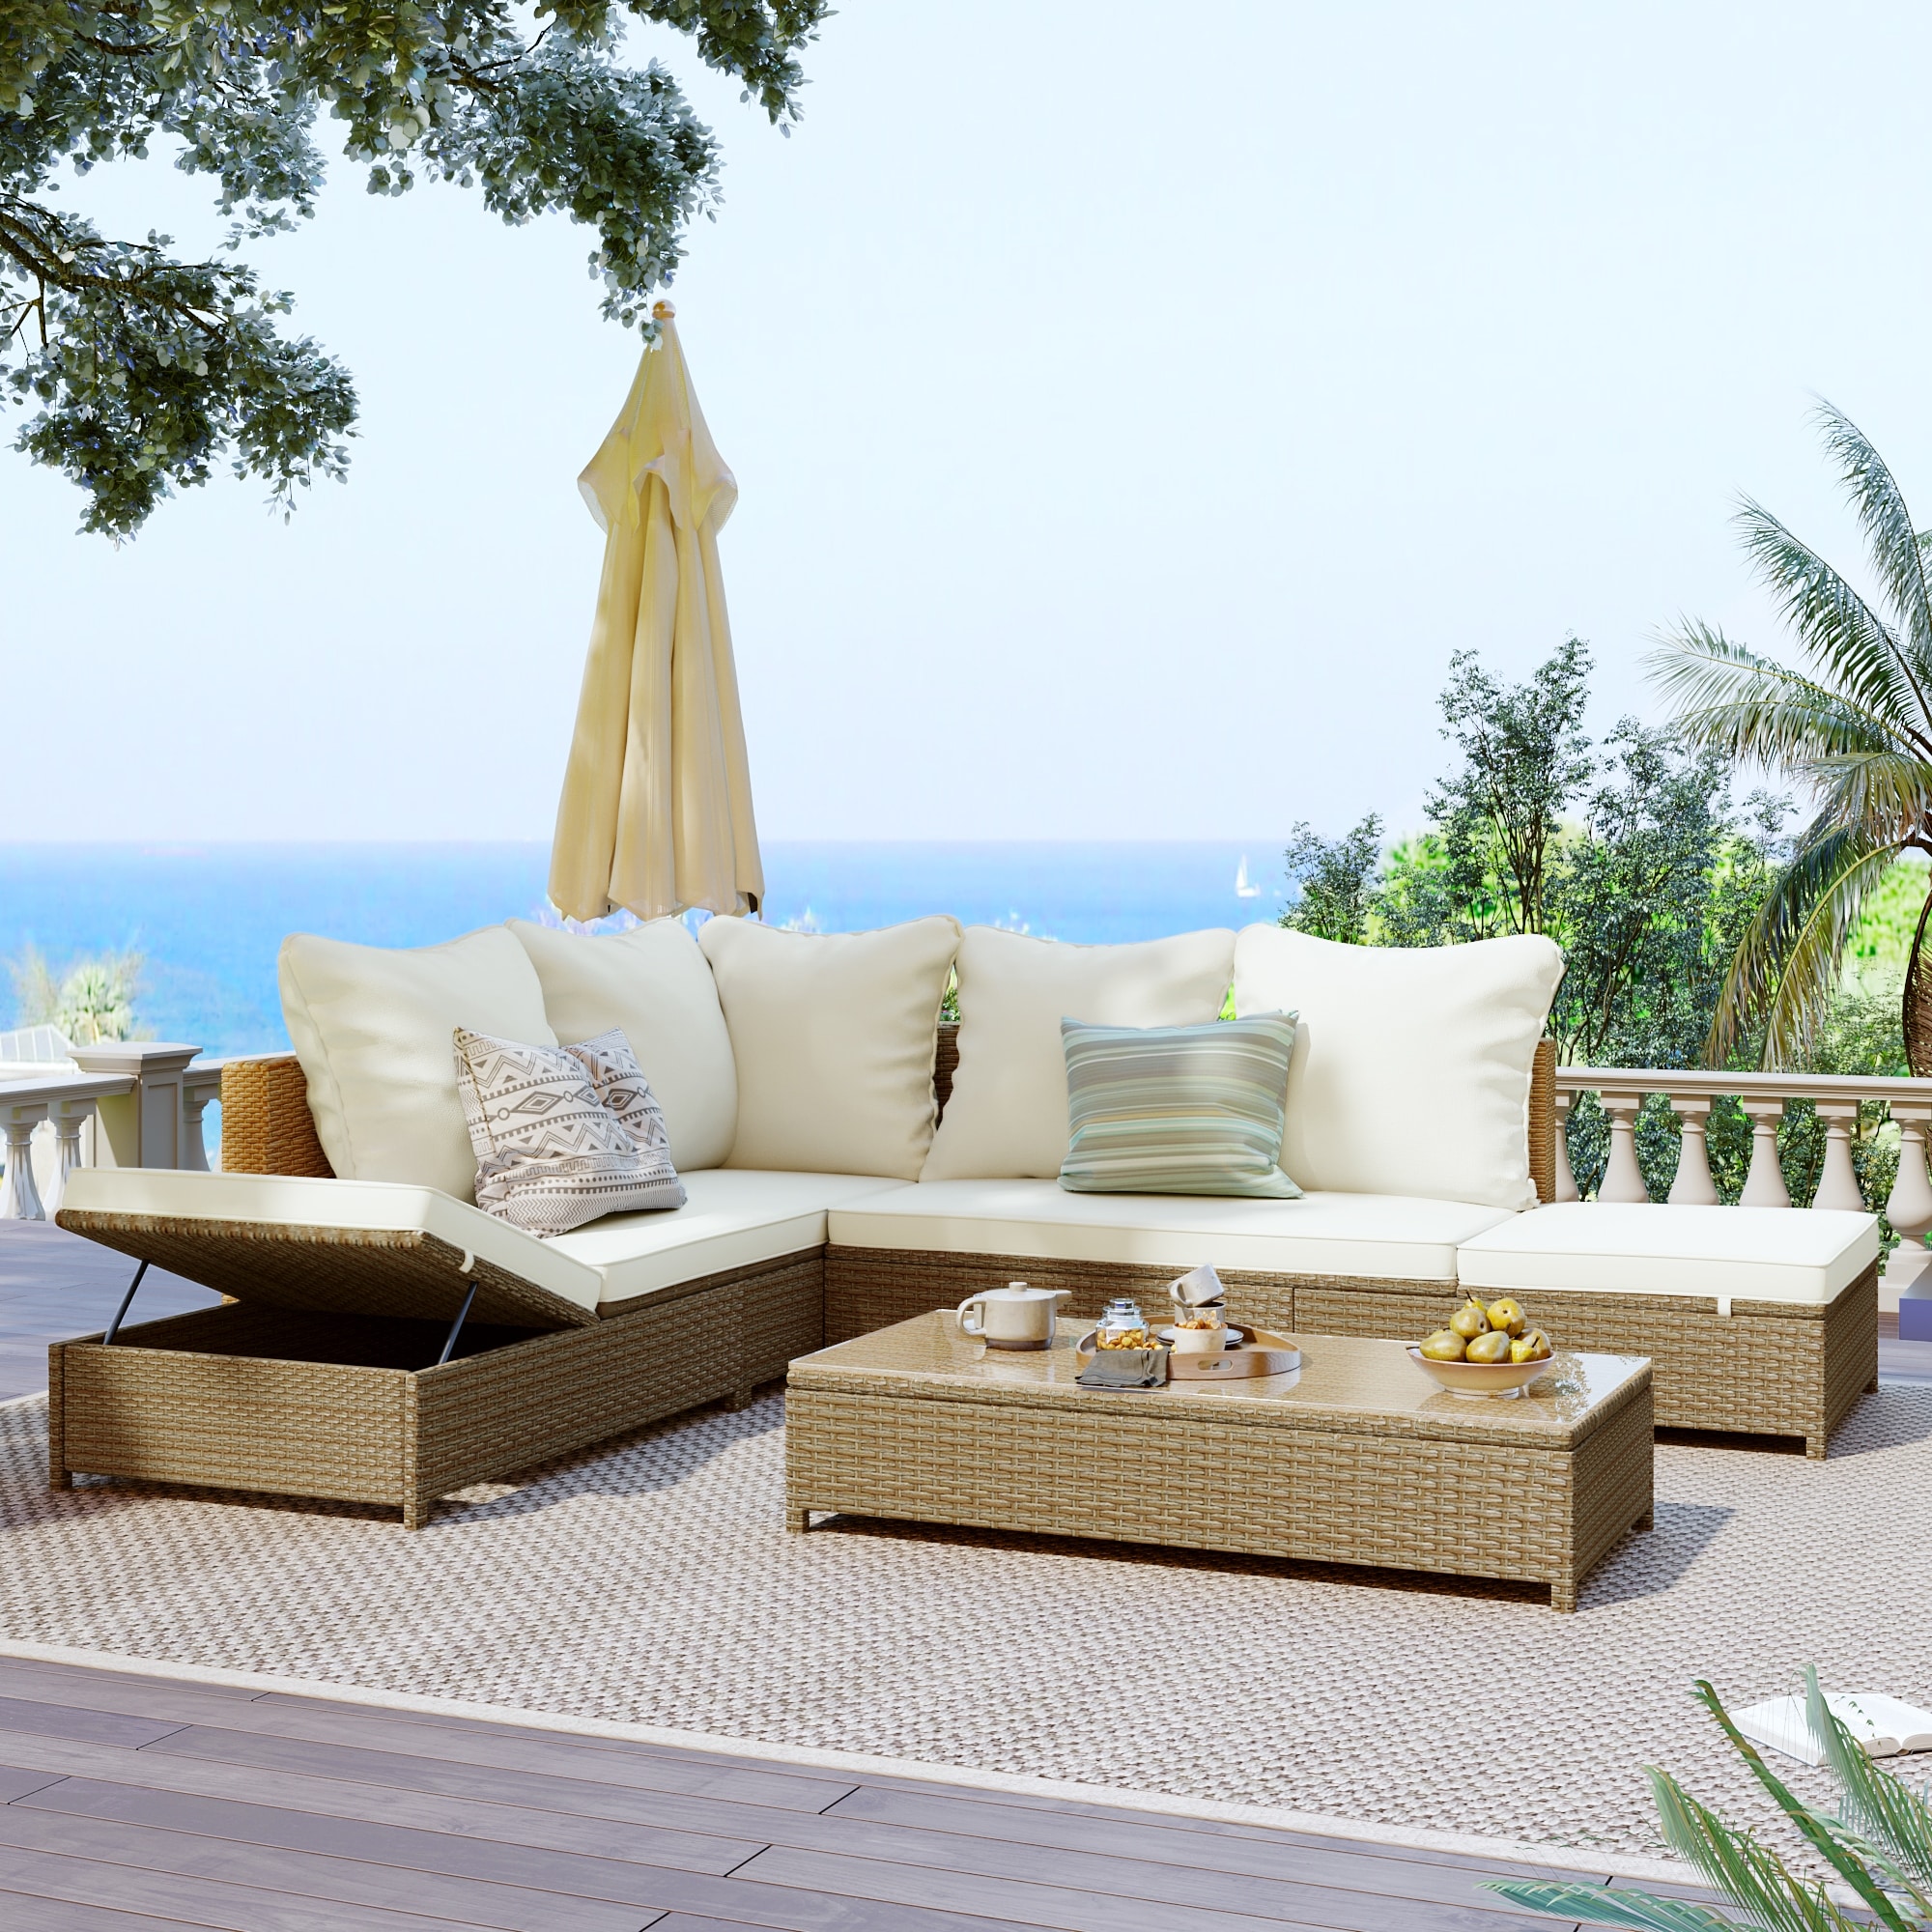 3-piece All-weather Pe Wicker Sectional Set With Chaise Lounge